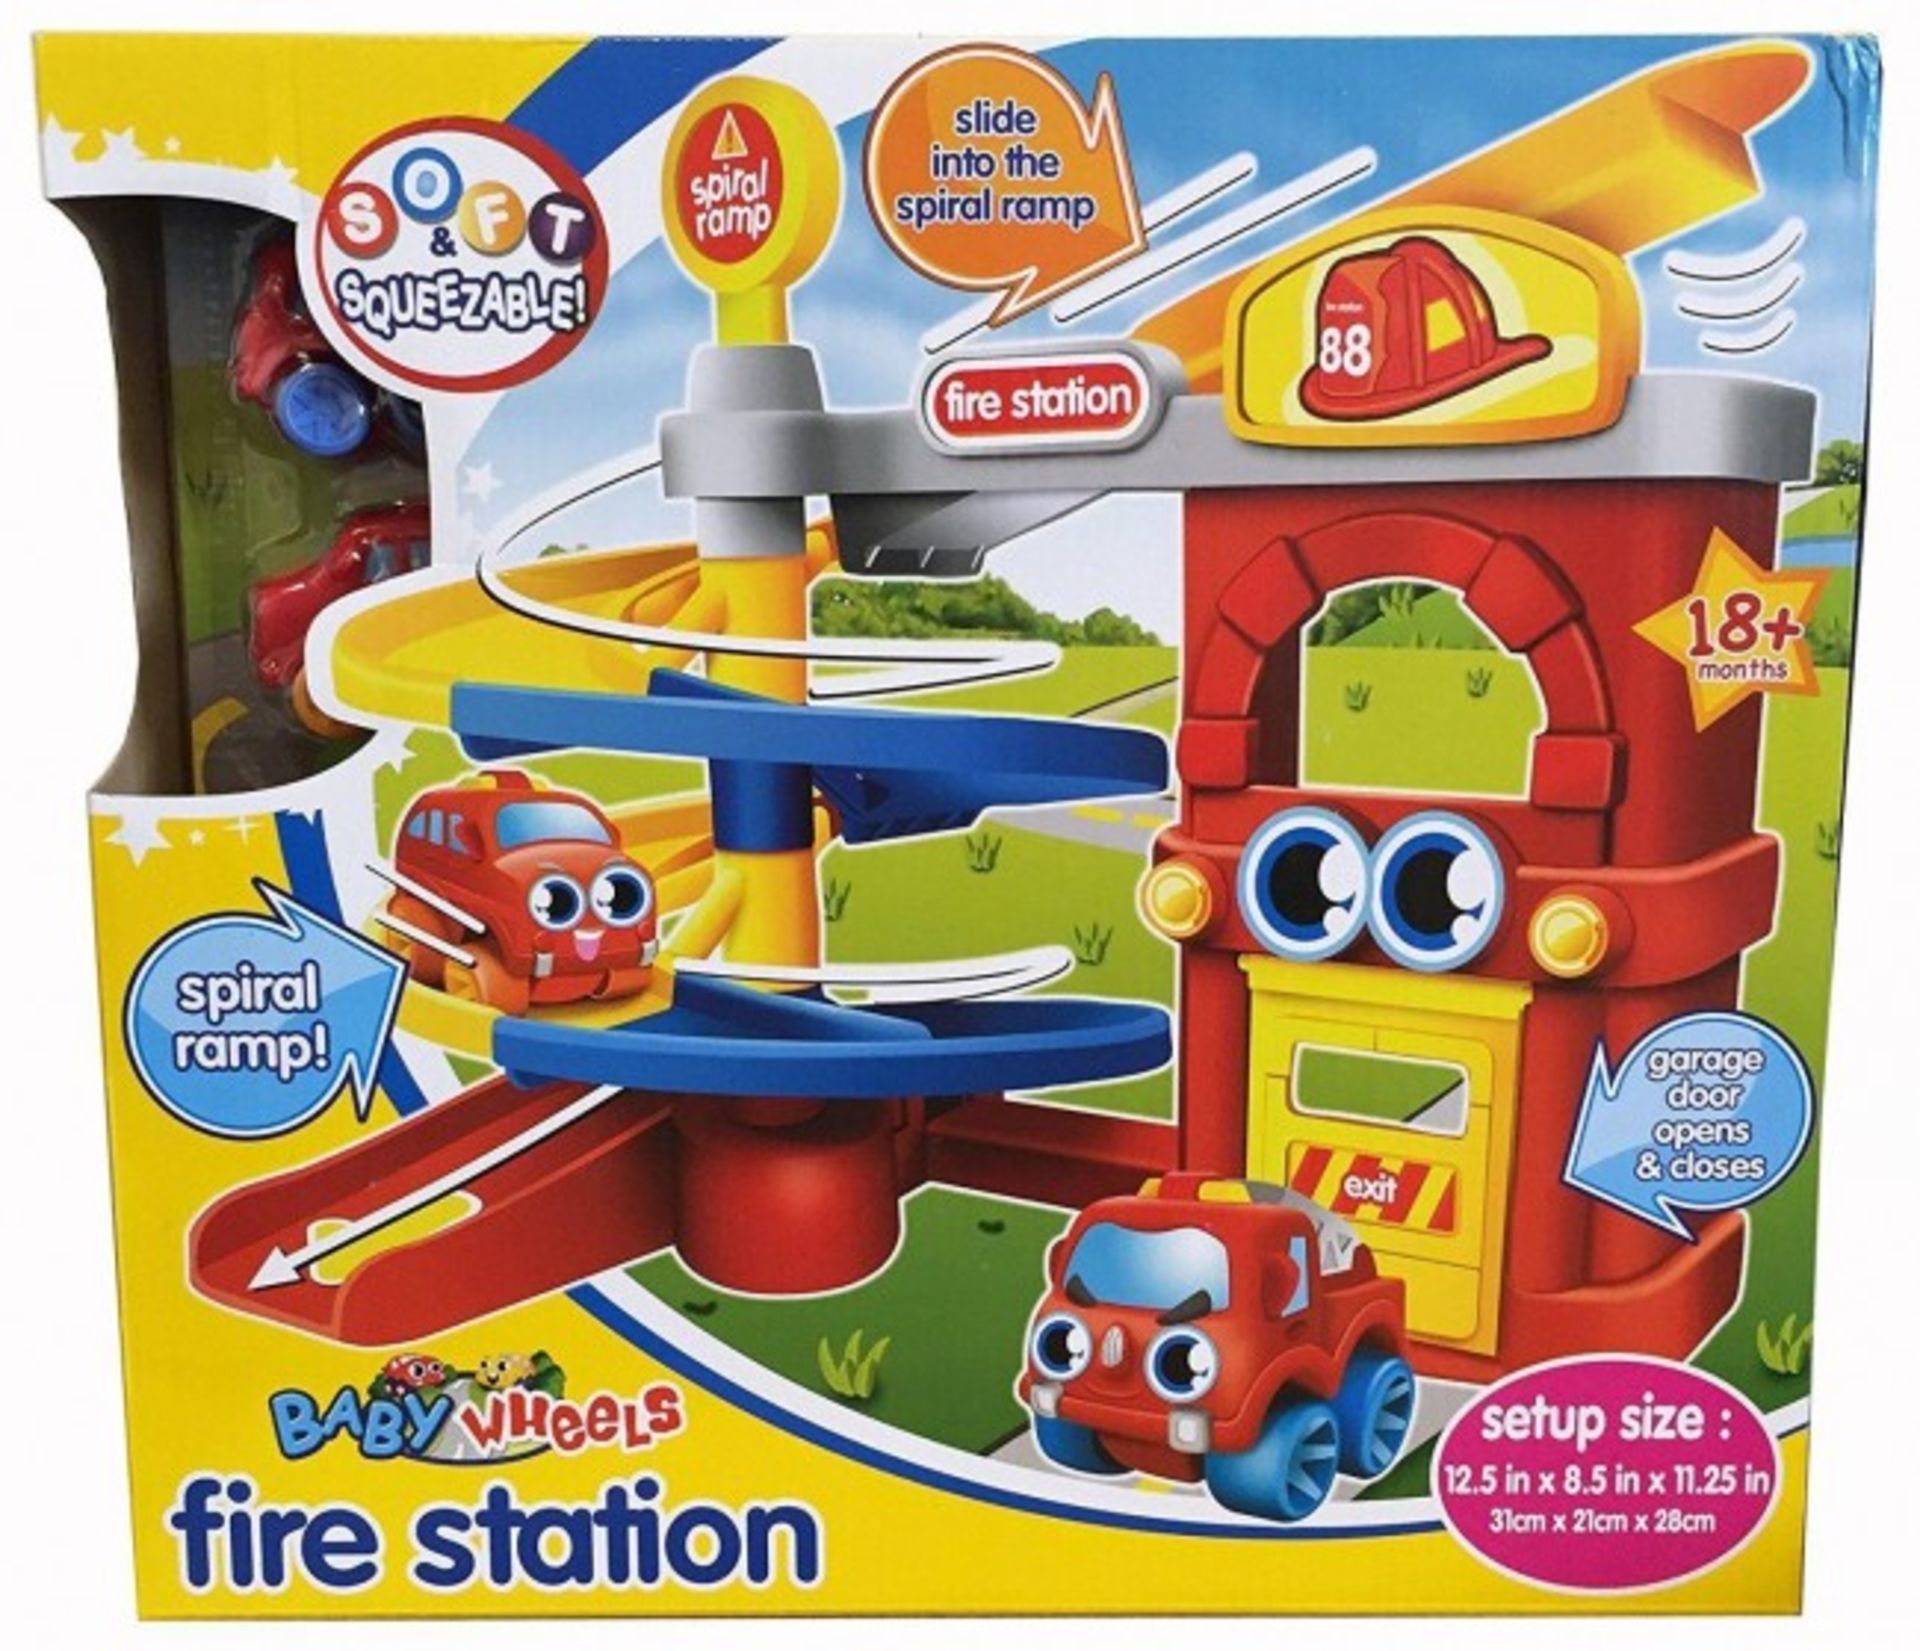 V Brand New Baby Wheels Fire Station Play Set 8mths + ISP £12.99 (My Shop) X 2 YOUR BID PRICE TO